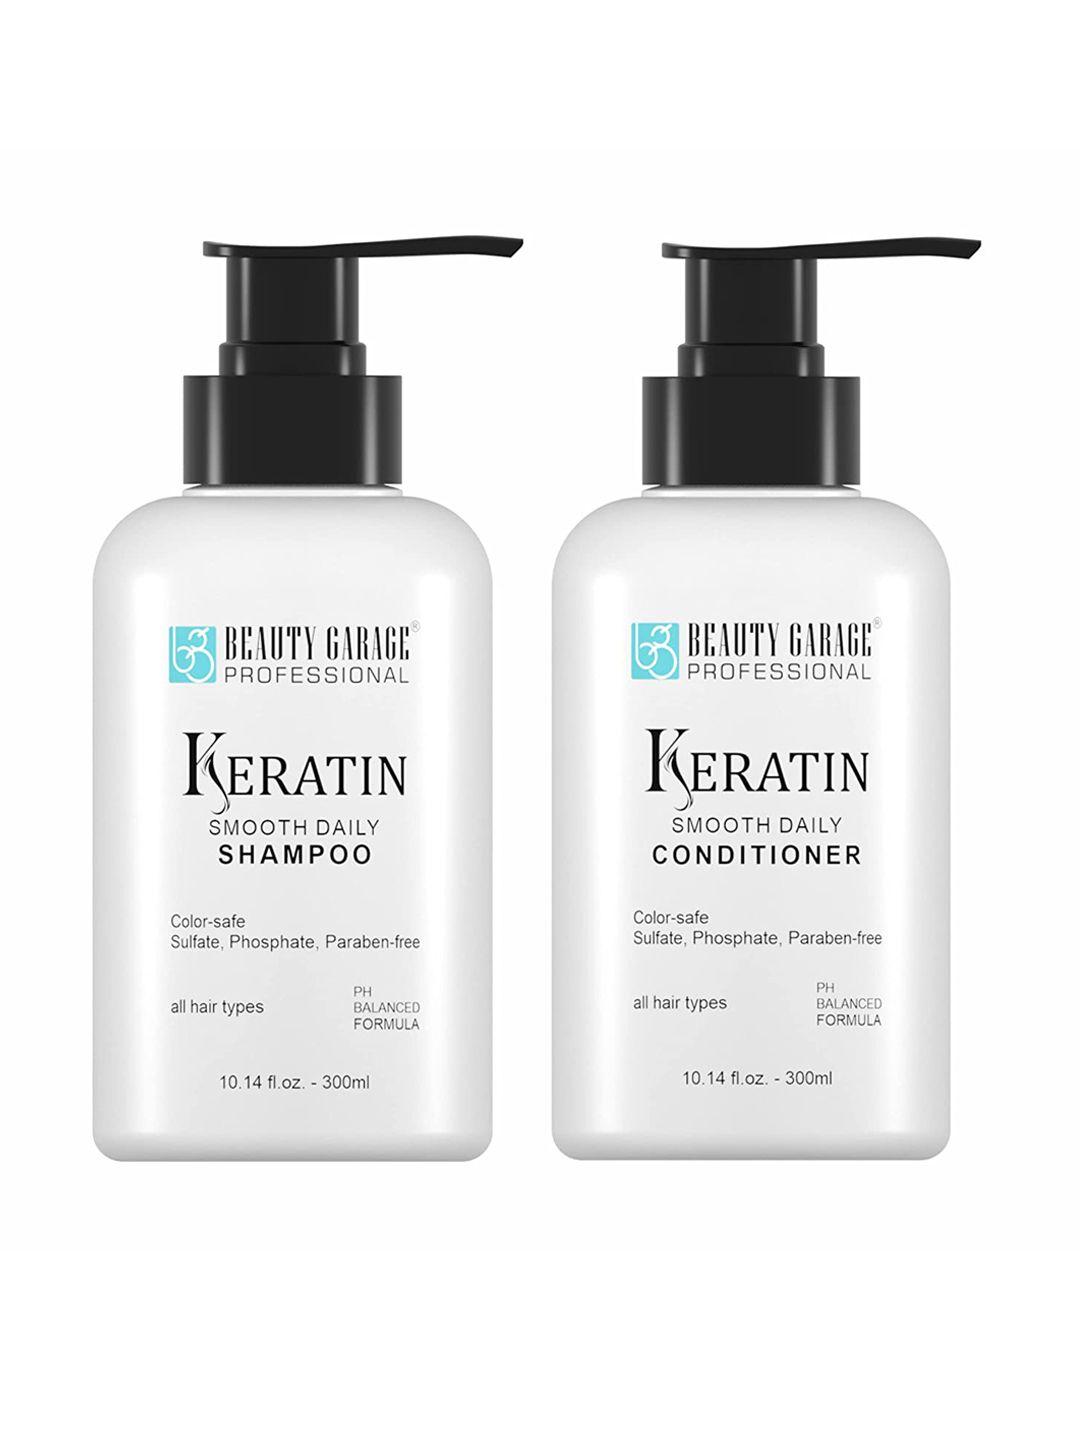 beauty garage keratin smooth daily shampoo and conditioner 300 ml each